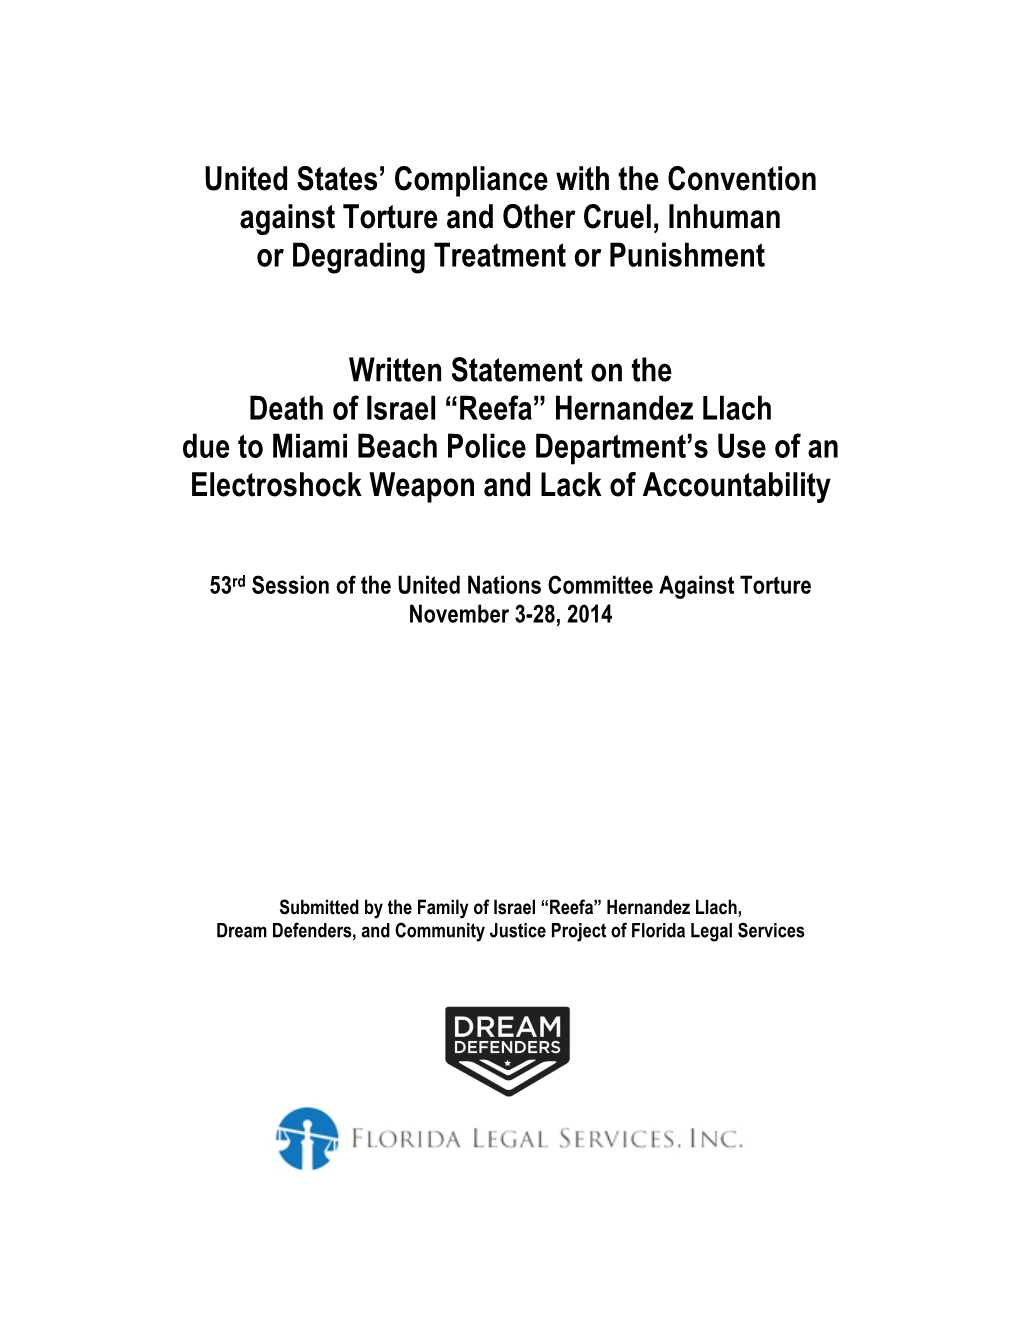 United States' Compliance with the Convention Against Torture And